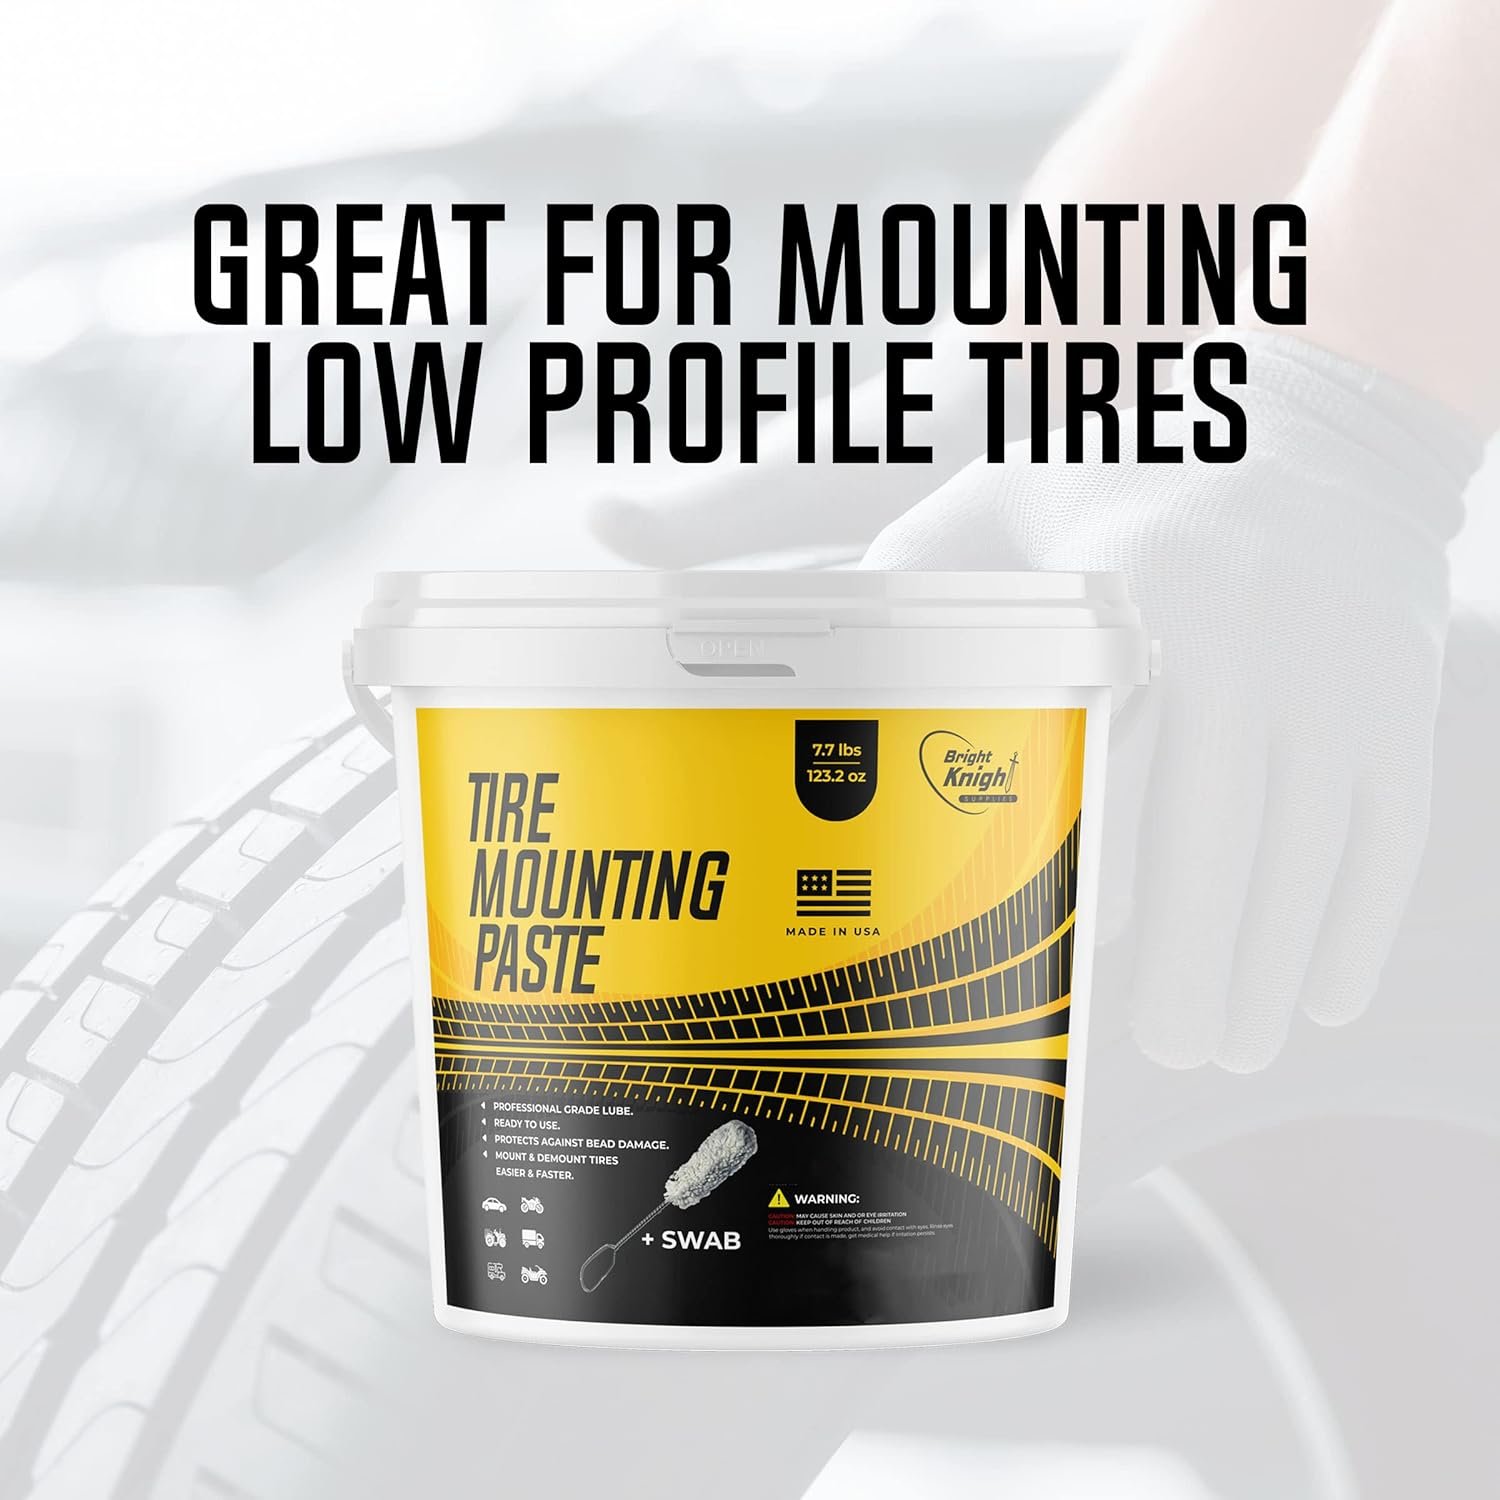 Tire Mounting Paste Review